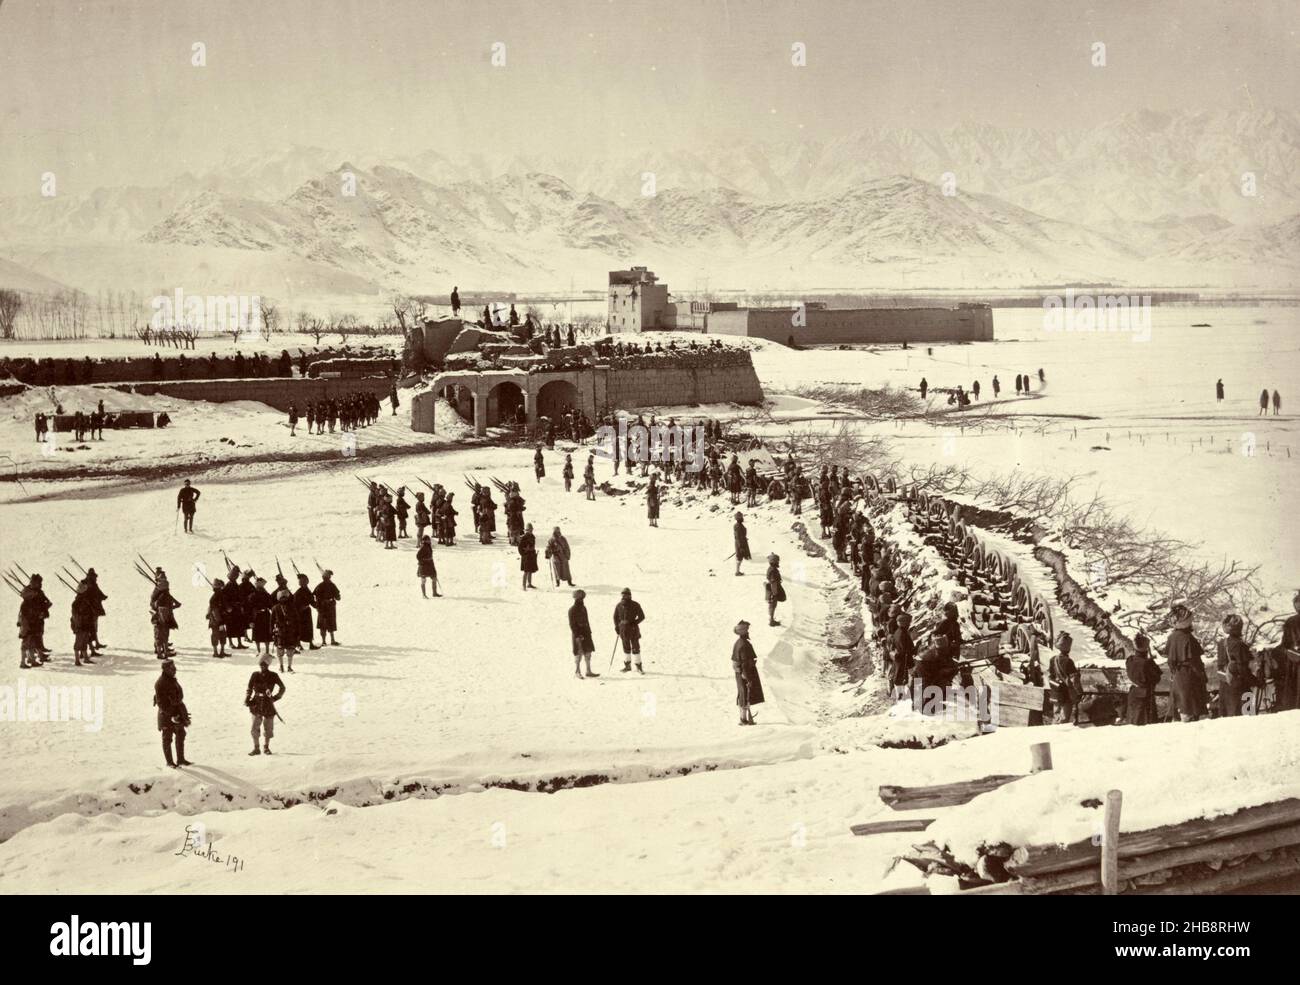 Army Unit in Position during the Winter in the Second Anglo-Afghan War, Army Unit in Position during the Second Anglo-Afghan War, John Burke (mentioned on object), Kabul, 3-Dec-1879, paper, albumen print, height 213 mm × width 272 mm Stock Photo